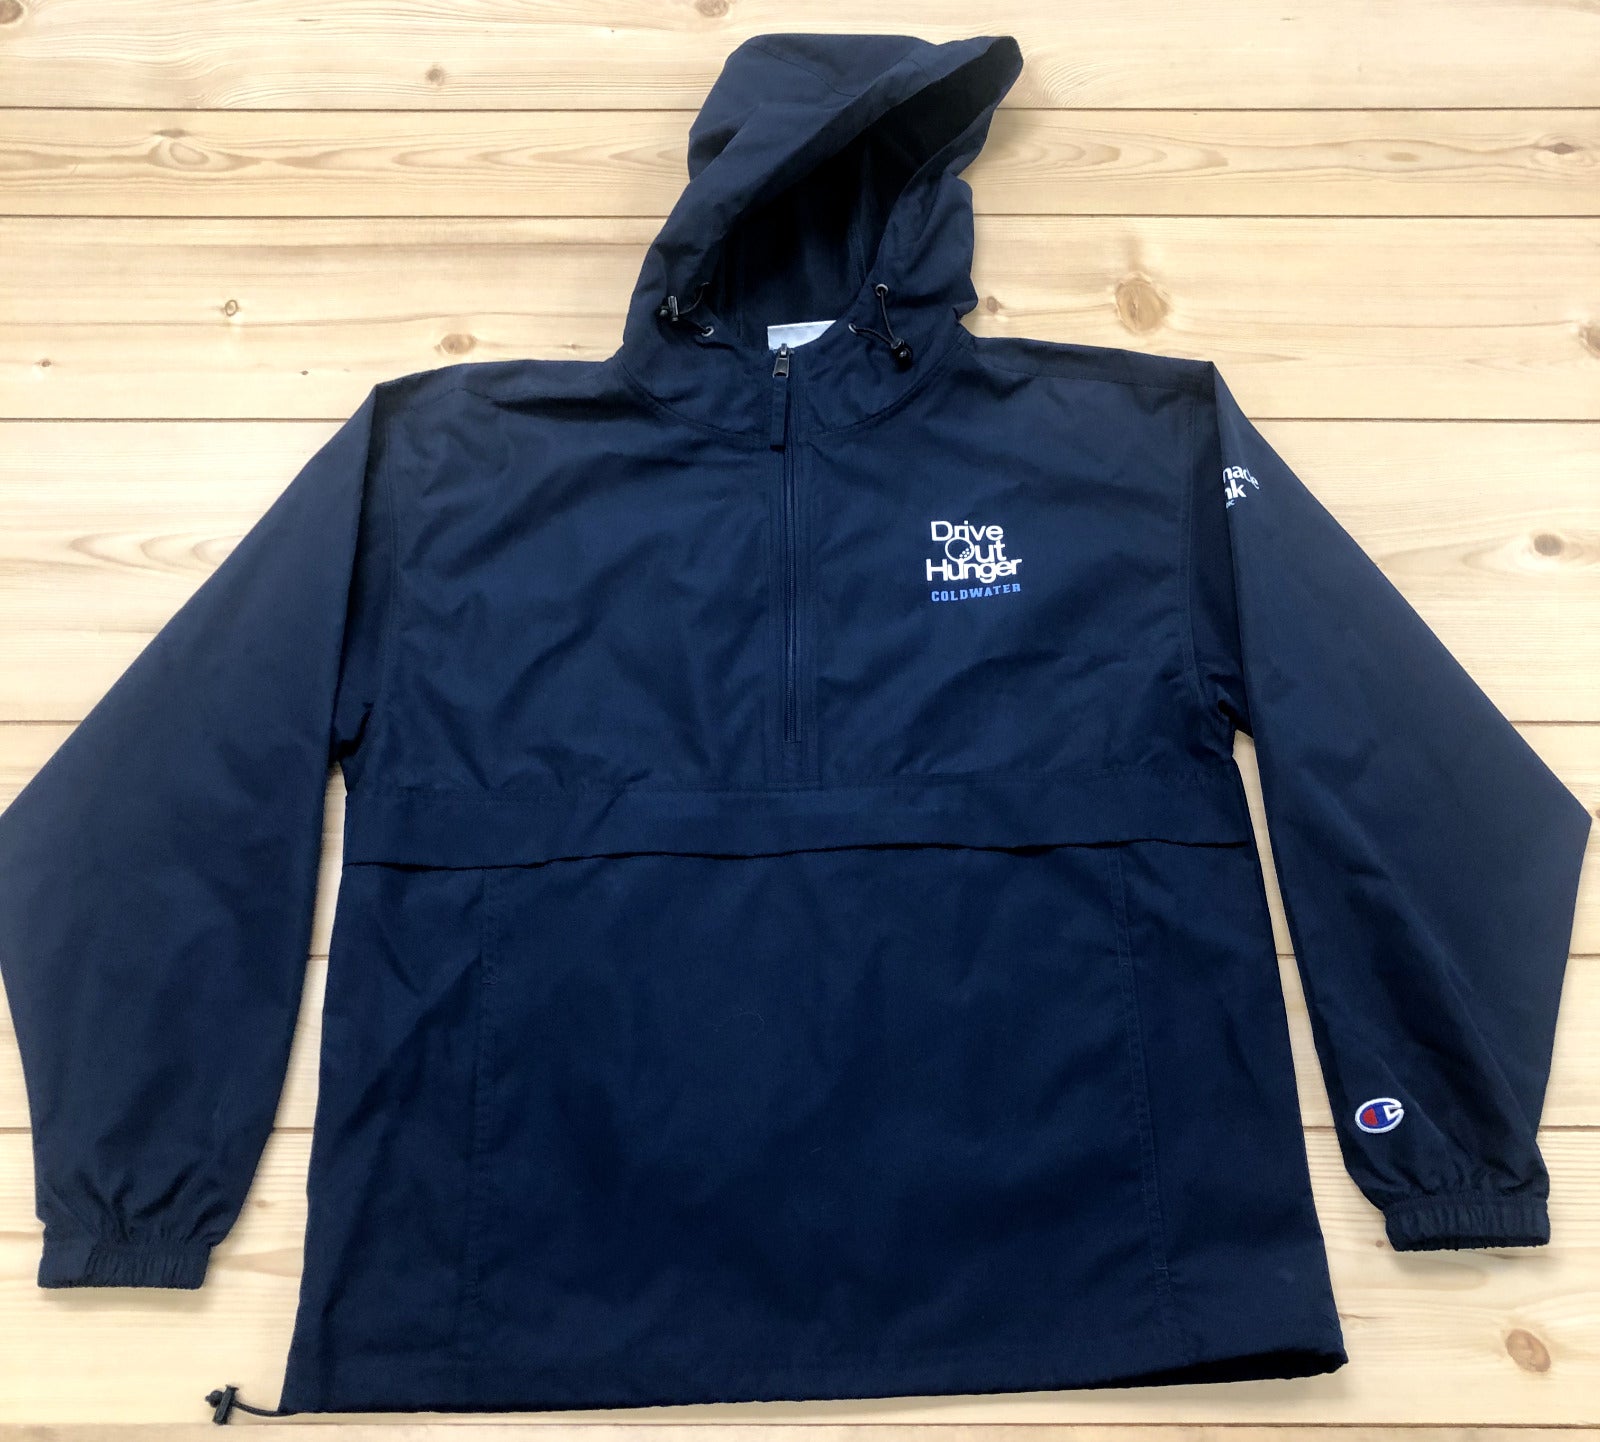 Champion Blue Logo Drive Out Hunger Pinnacle Bank Pullover Jacket Adult Size M